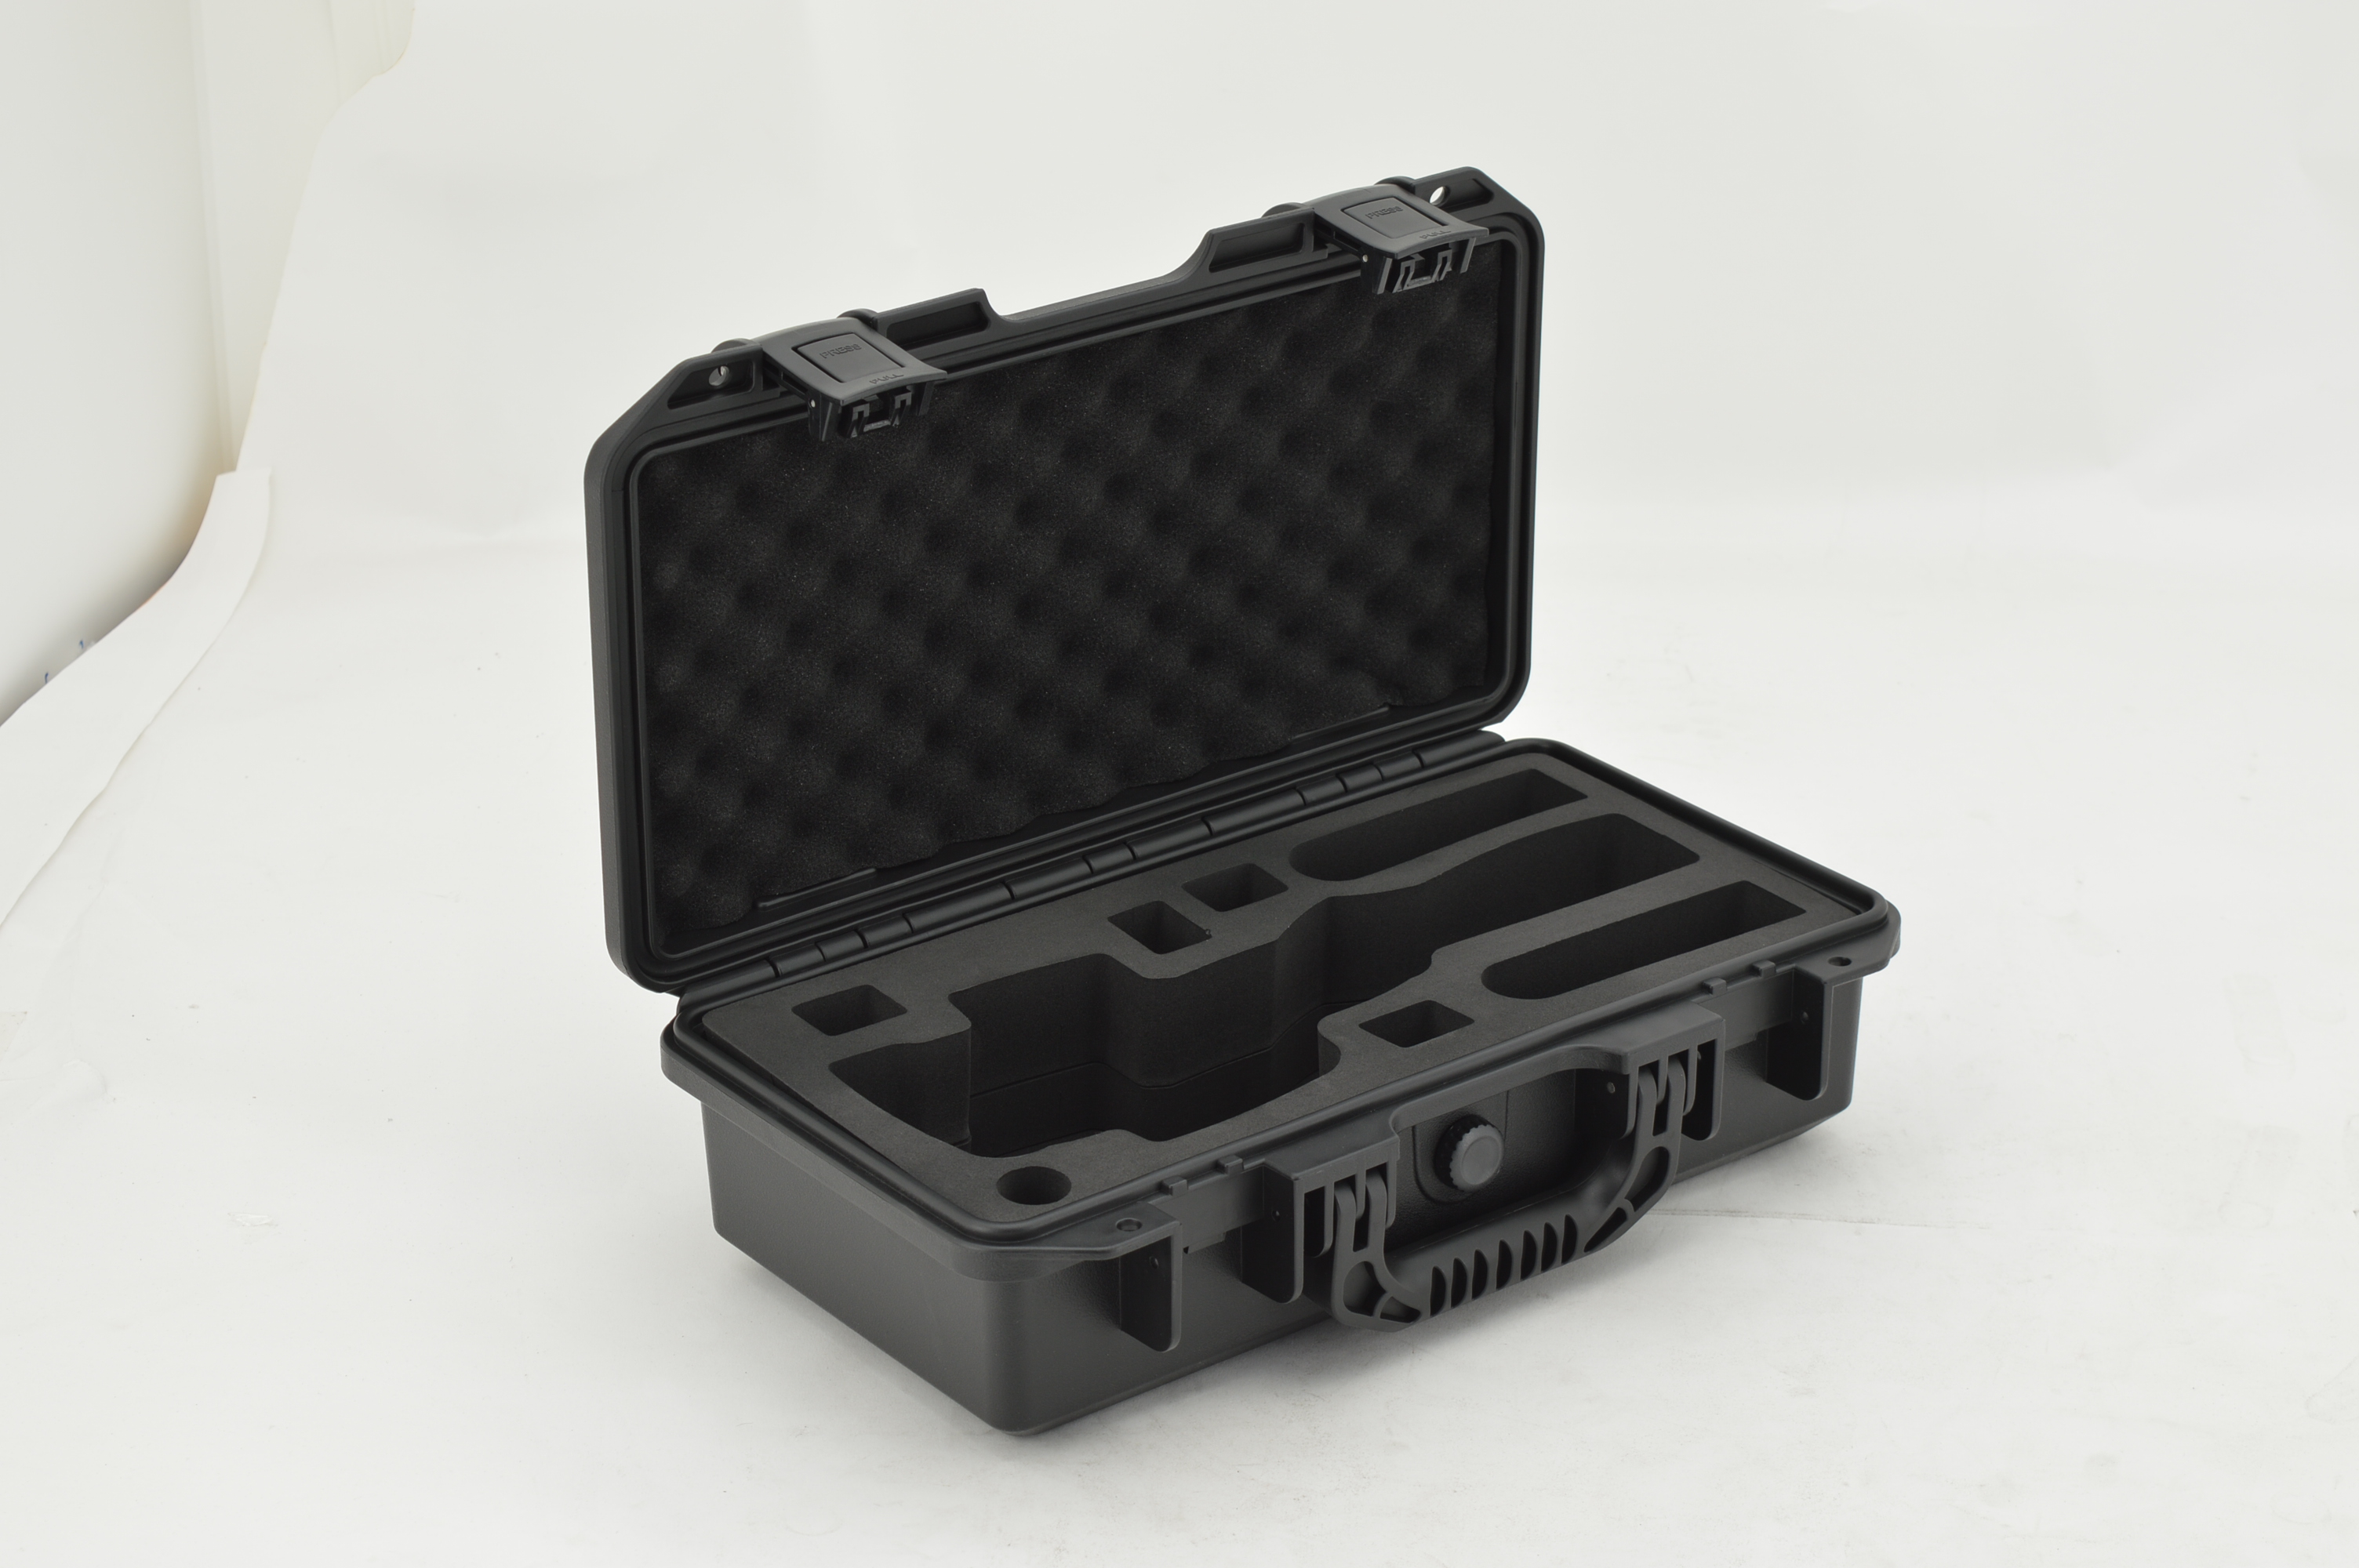 Hard Plastic PP Carrying Case Waterproof Shipping Case